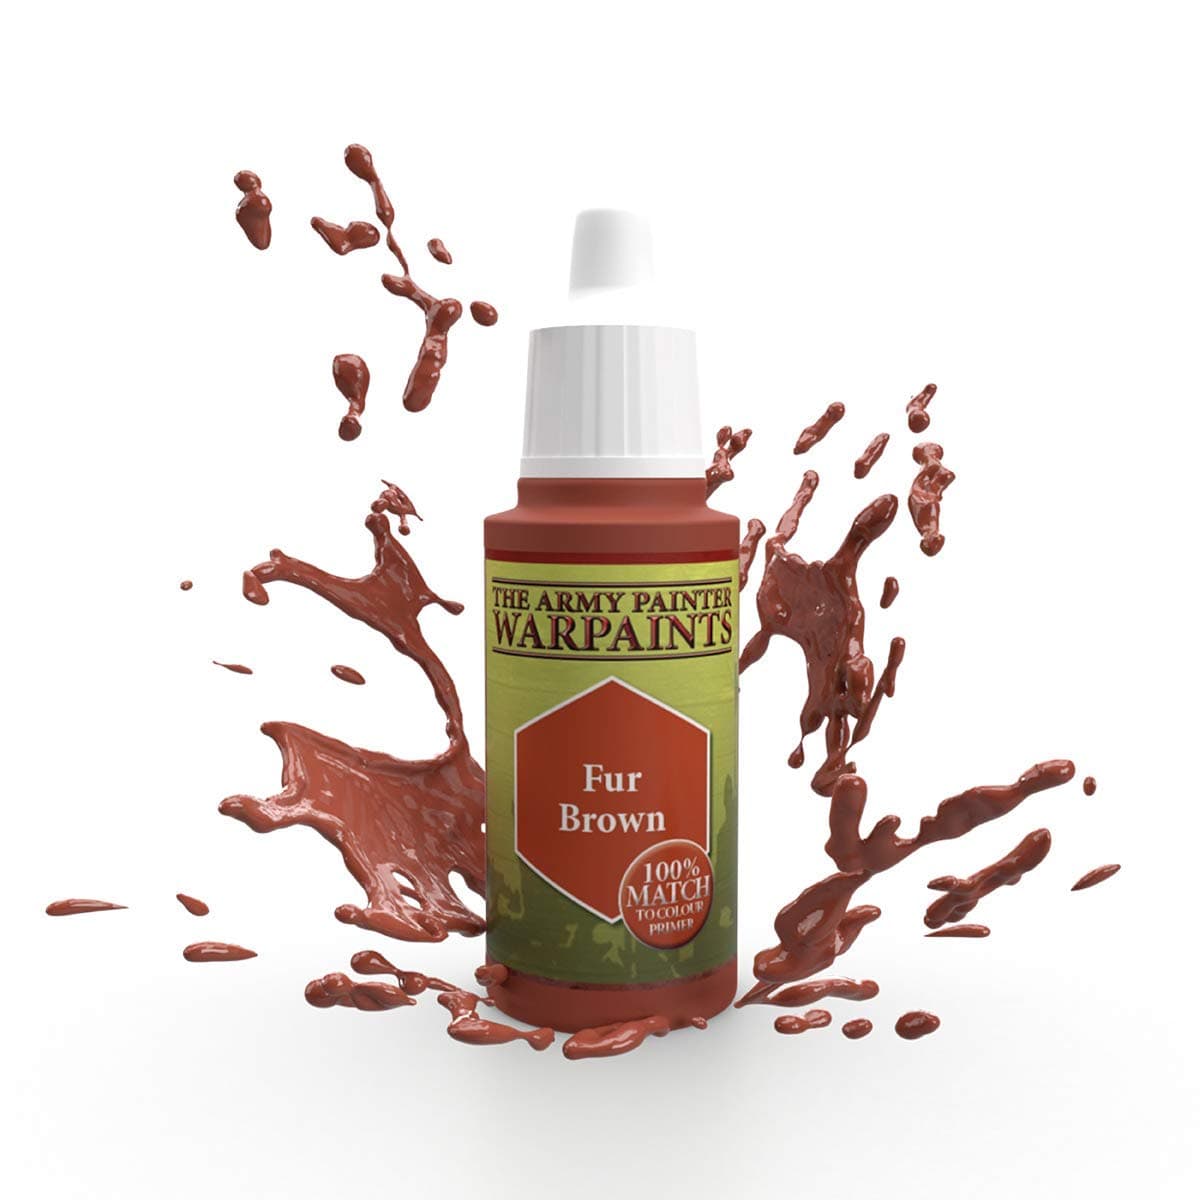 The Army Painter Accessories The Army Painter Warpaints: Fur Brown 18ml